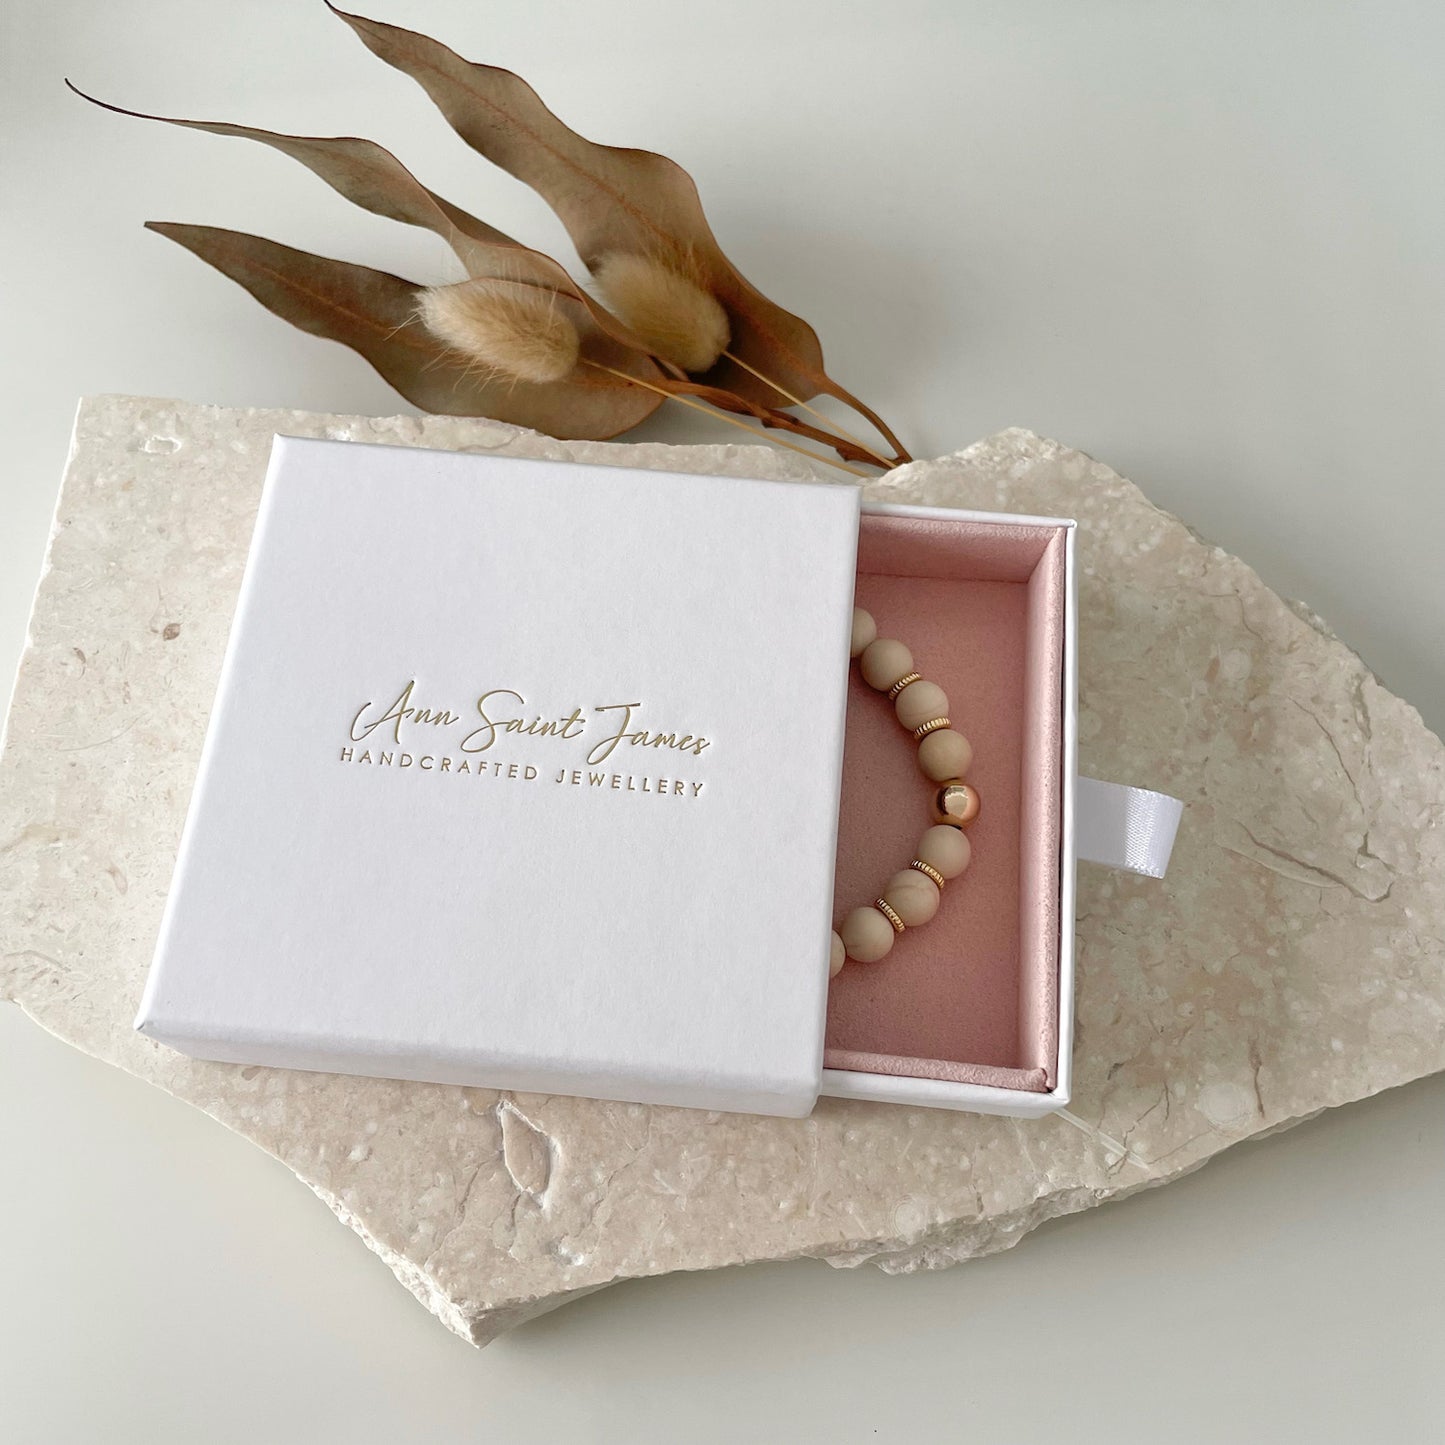 Ann Saint James packaging with natural gemstone beaded bracelet made of Natural Fossil crystal and 14k gold-filled metal over limestone slab.